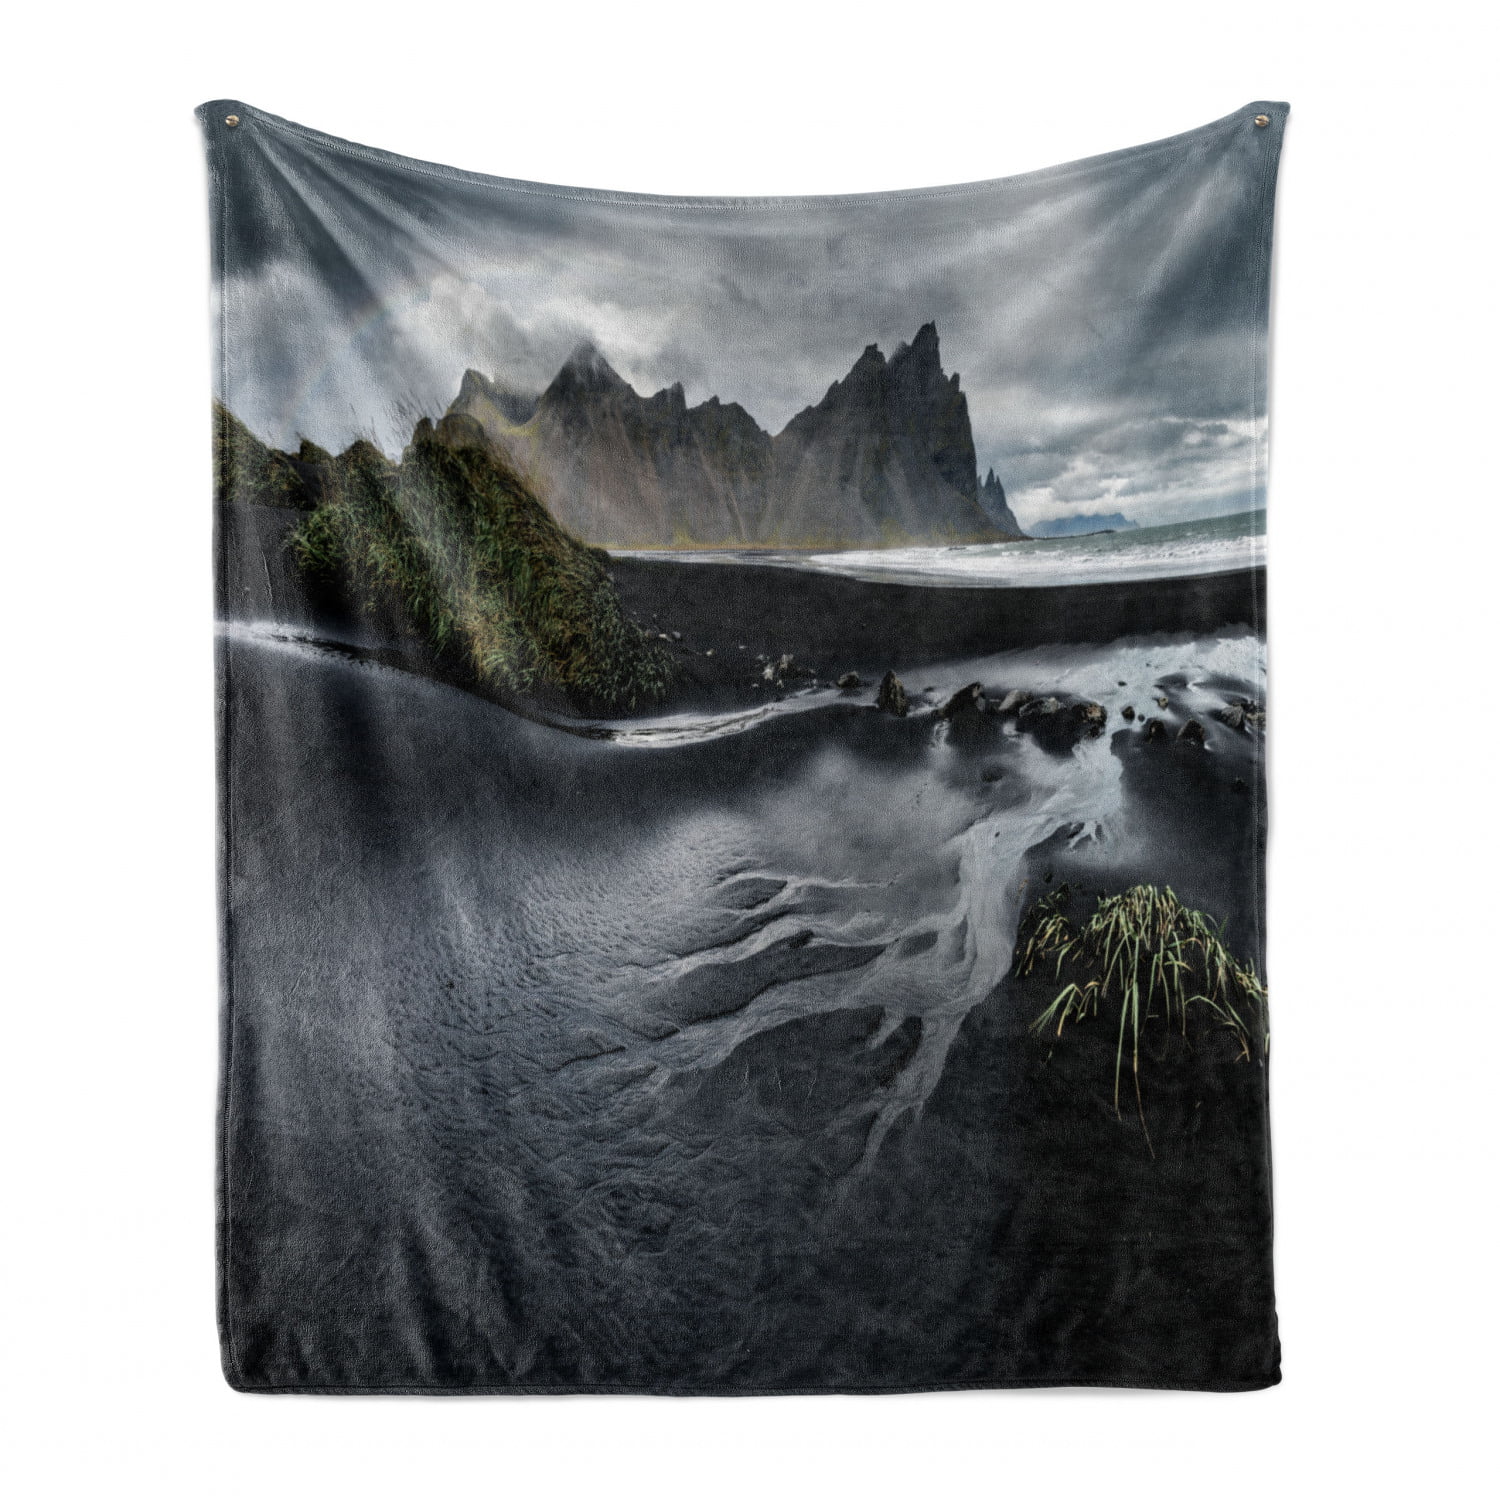 Cozy Plush for Indoor and Outdoor Use Multicolor Ambesonne Landscape Soft Flannel Fleece Throw Blanket Photo of Black Sand Beach in Southern Iceland Long Exposure Shot Scenic Outdoors 60 x 80